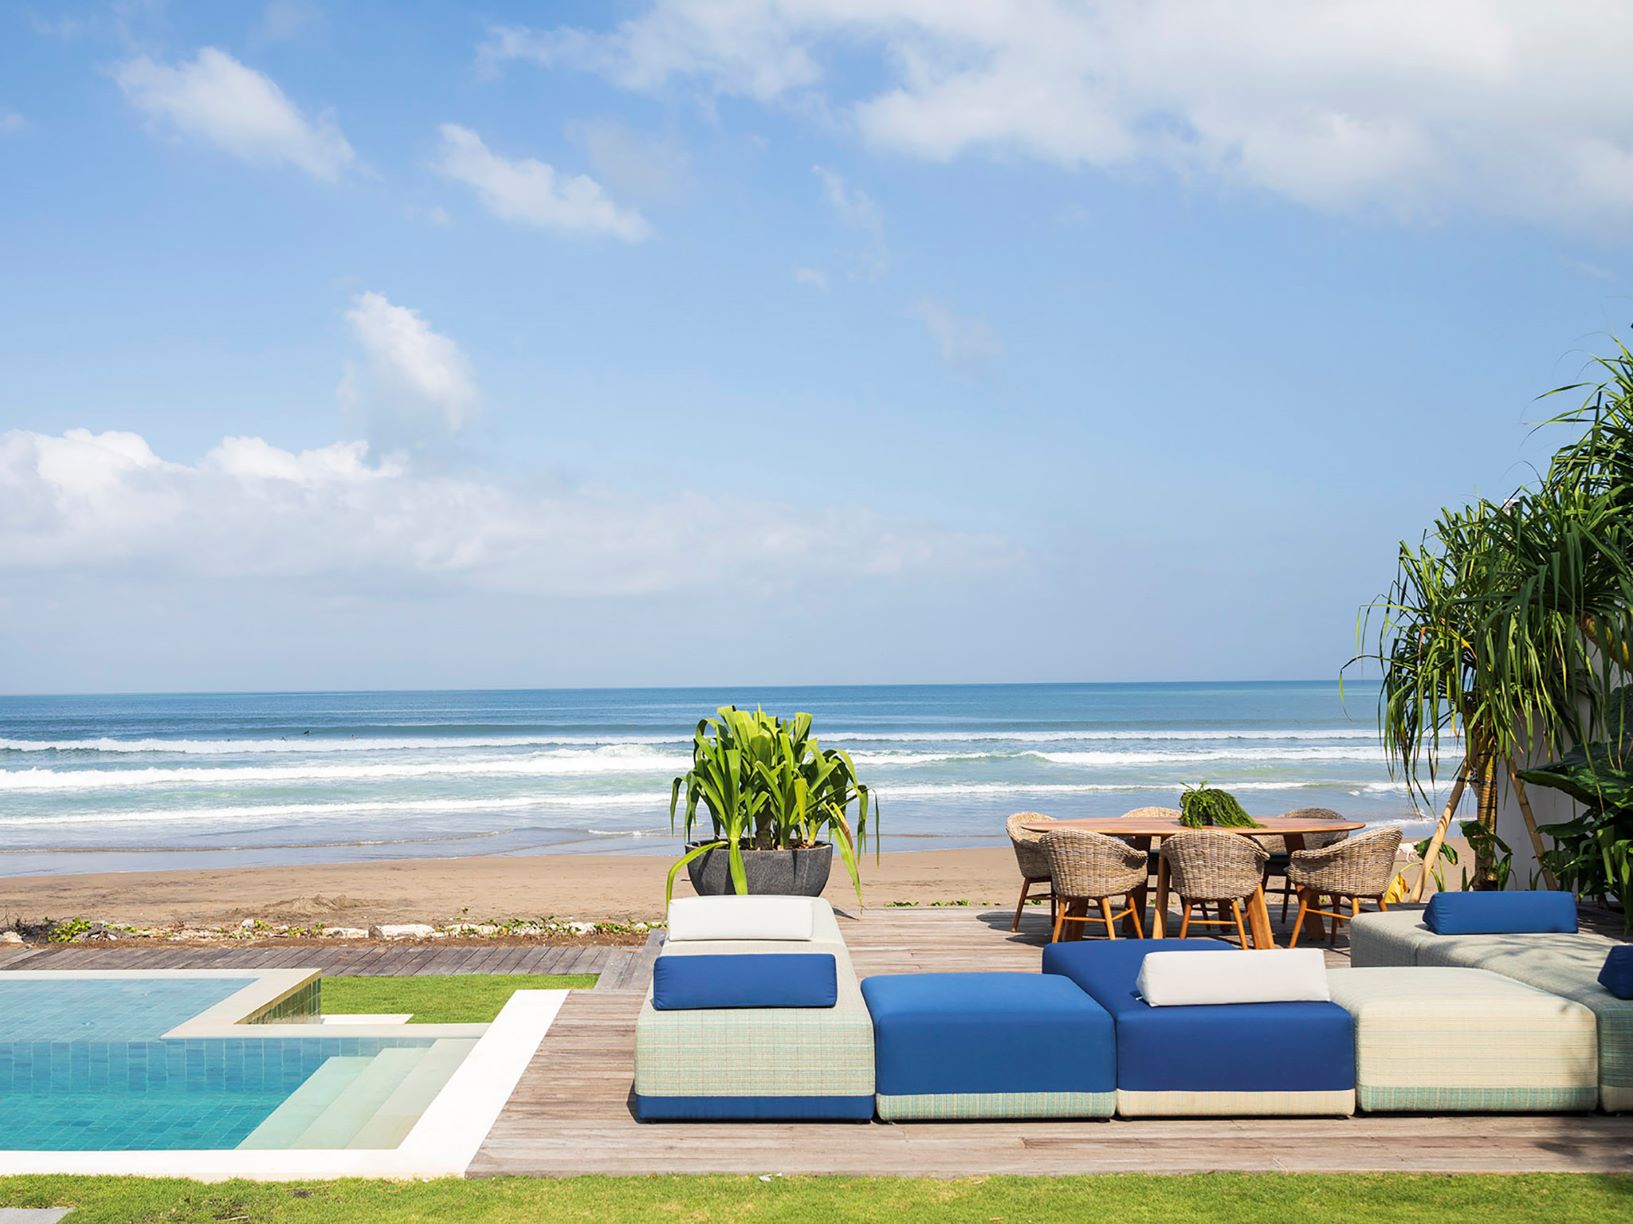 Noku Beach House - Pool and open air seating area